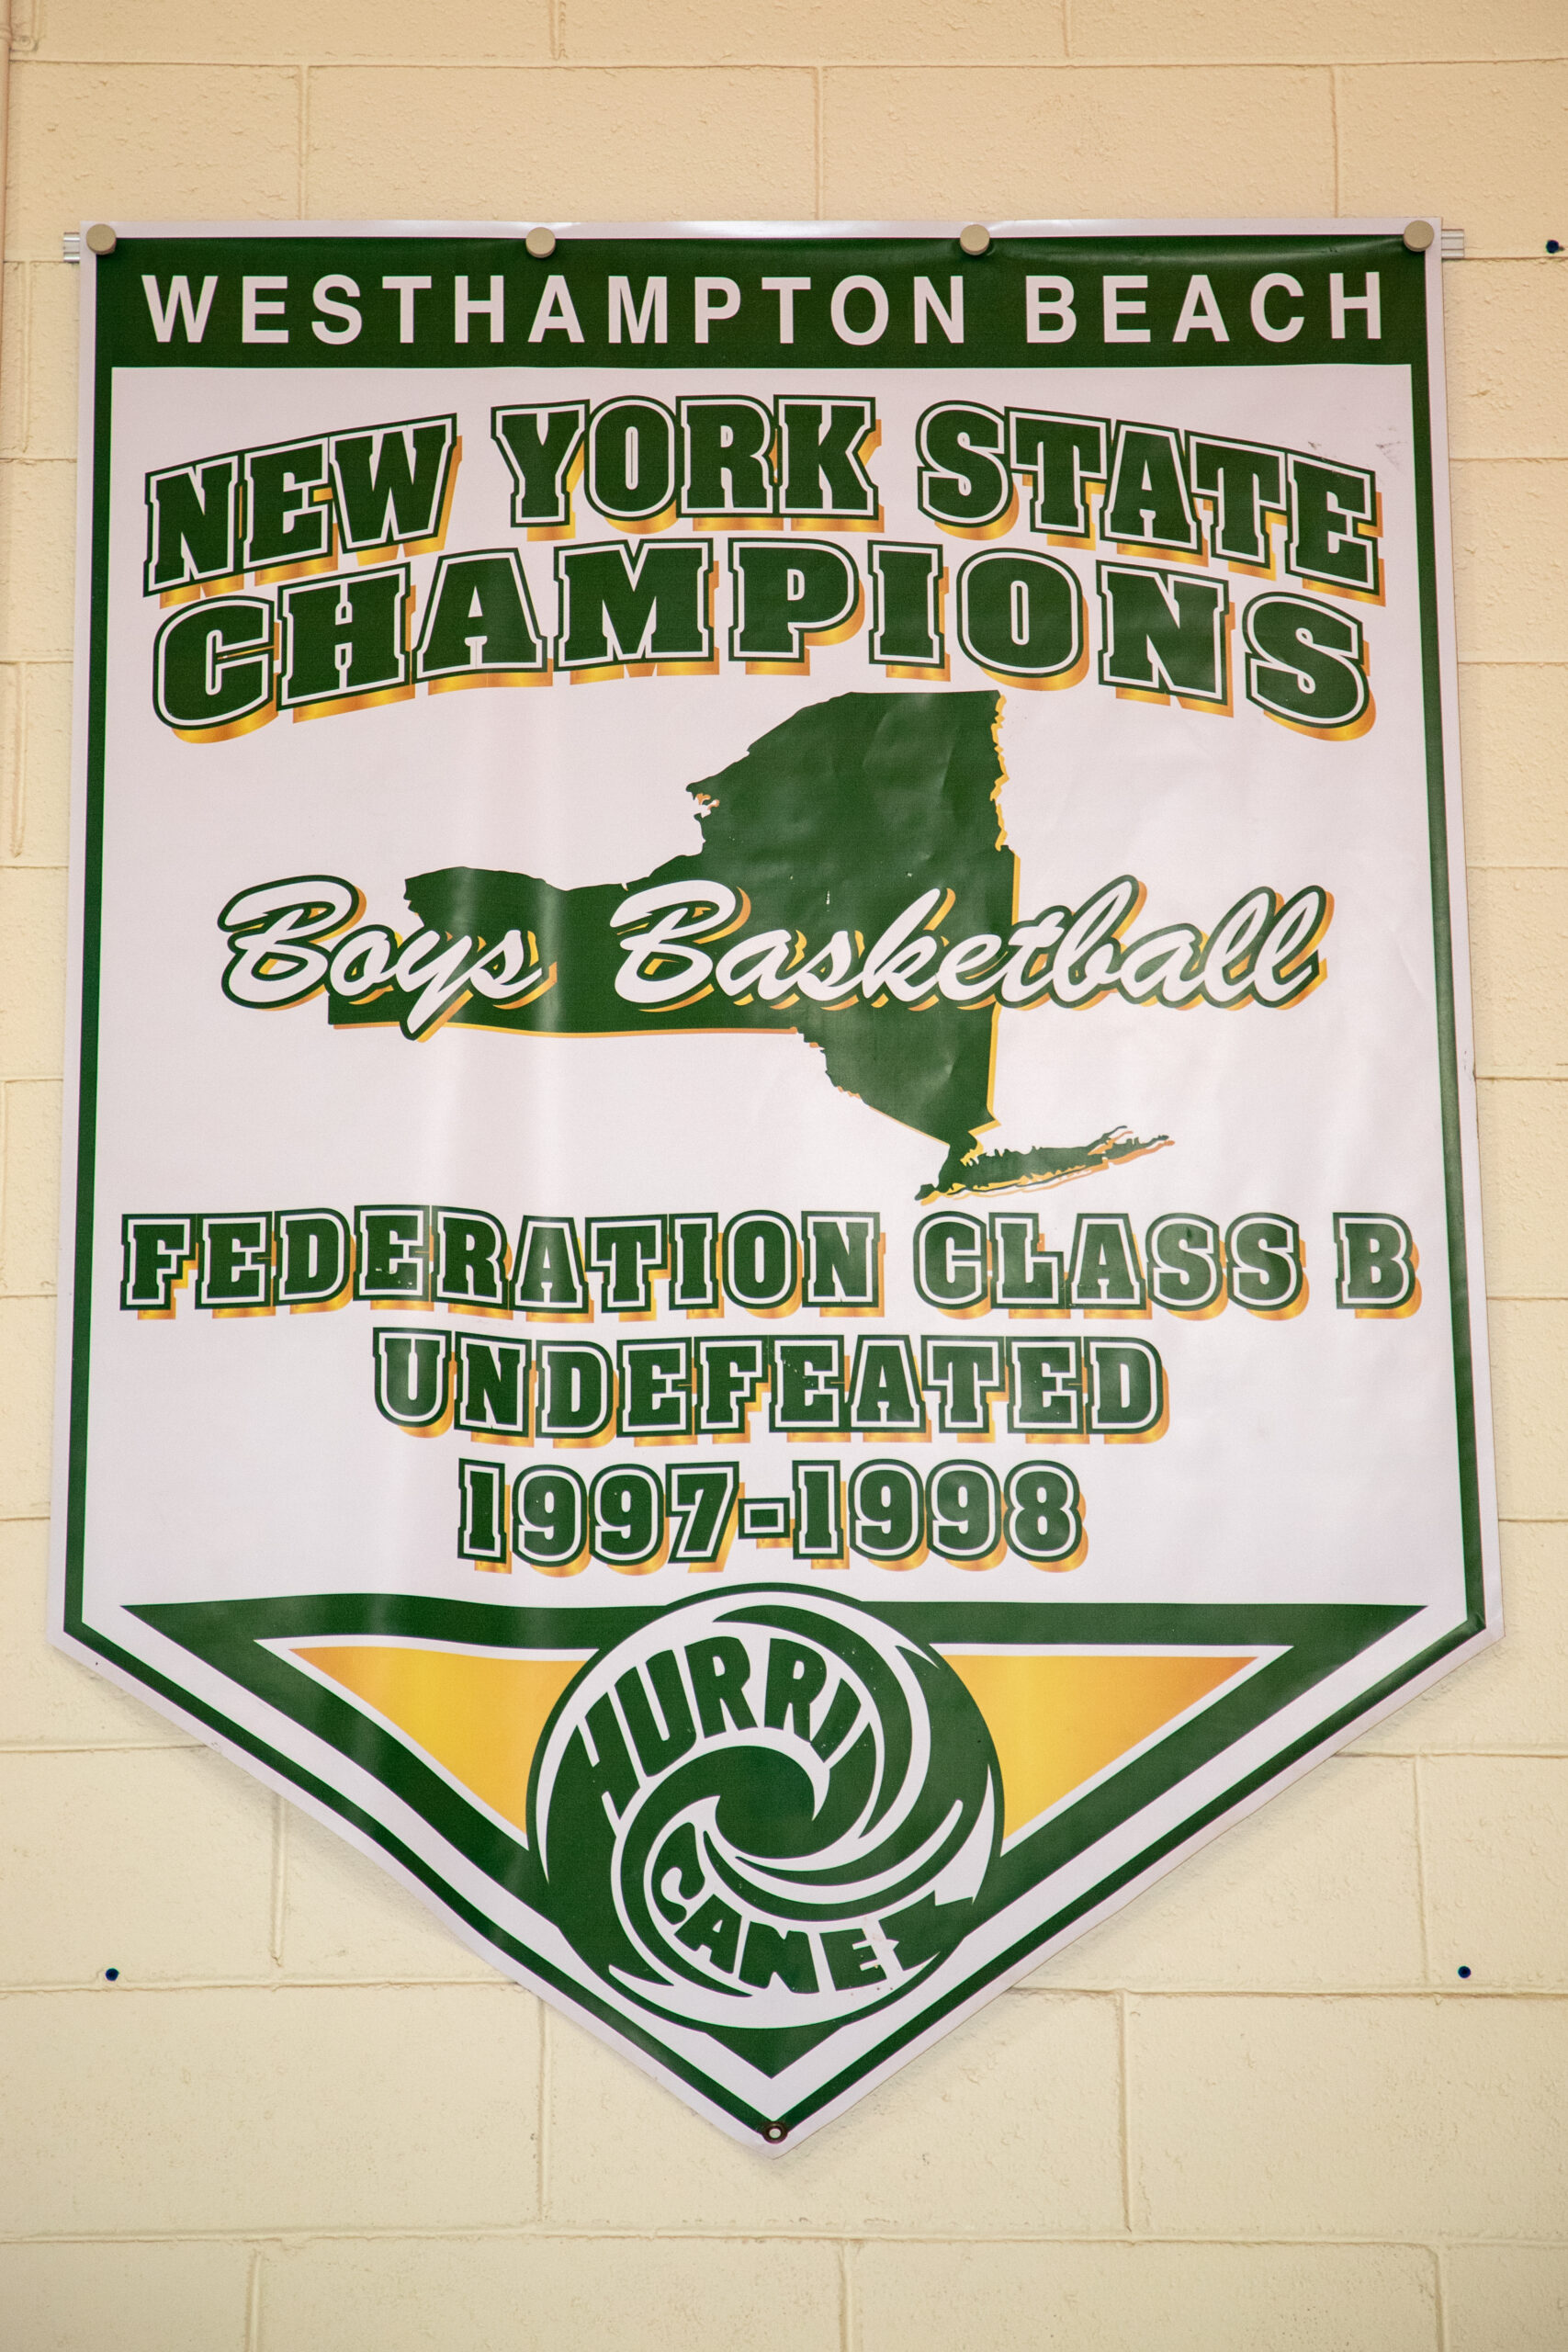 The Westhampton Beach boys basketball team had the perfect season in 1997-1998, going 28-0 and winning both federation and state Class B titles.   MICHAEL O'CONNOR